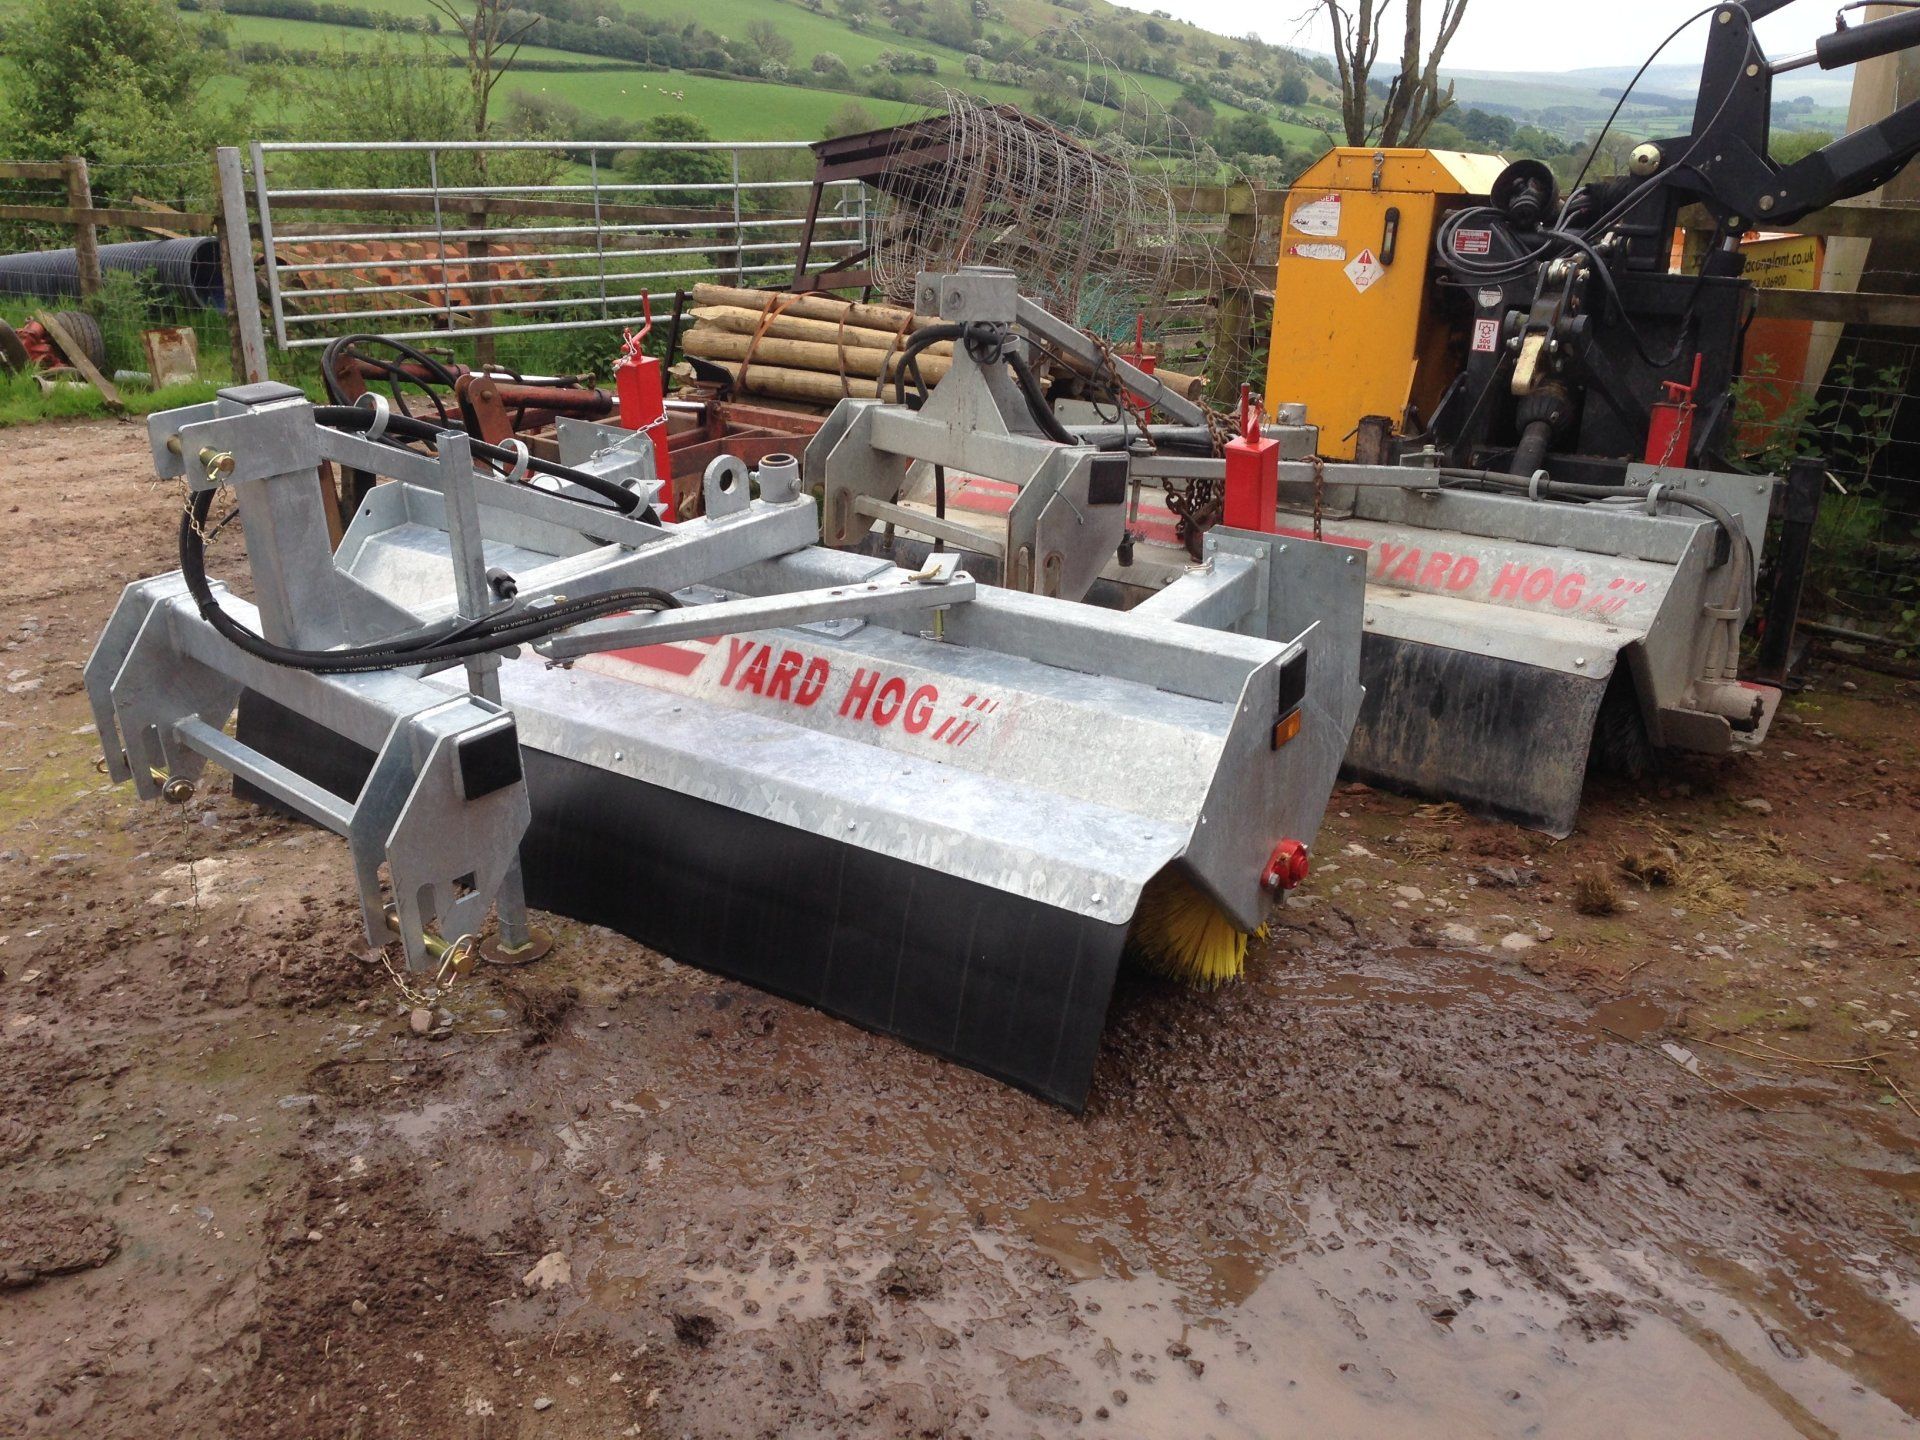 Agricultural Machinery Hire UK